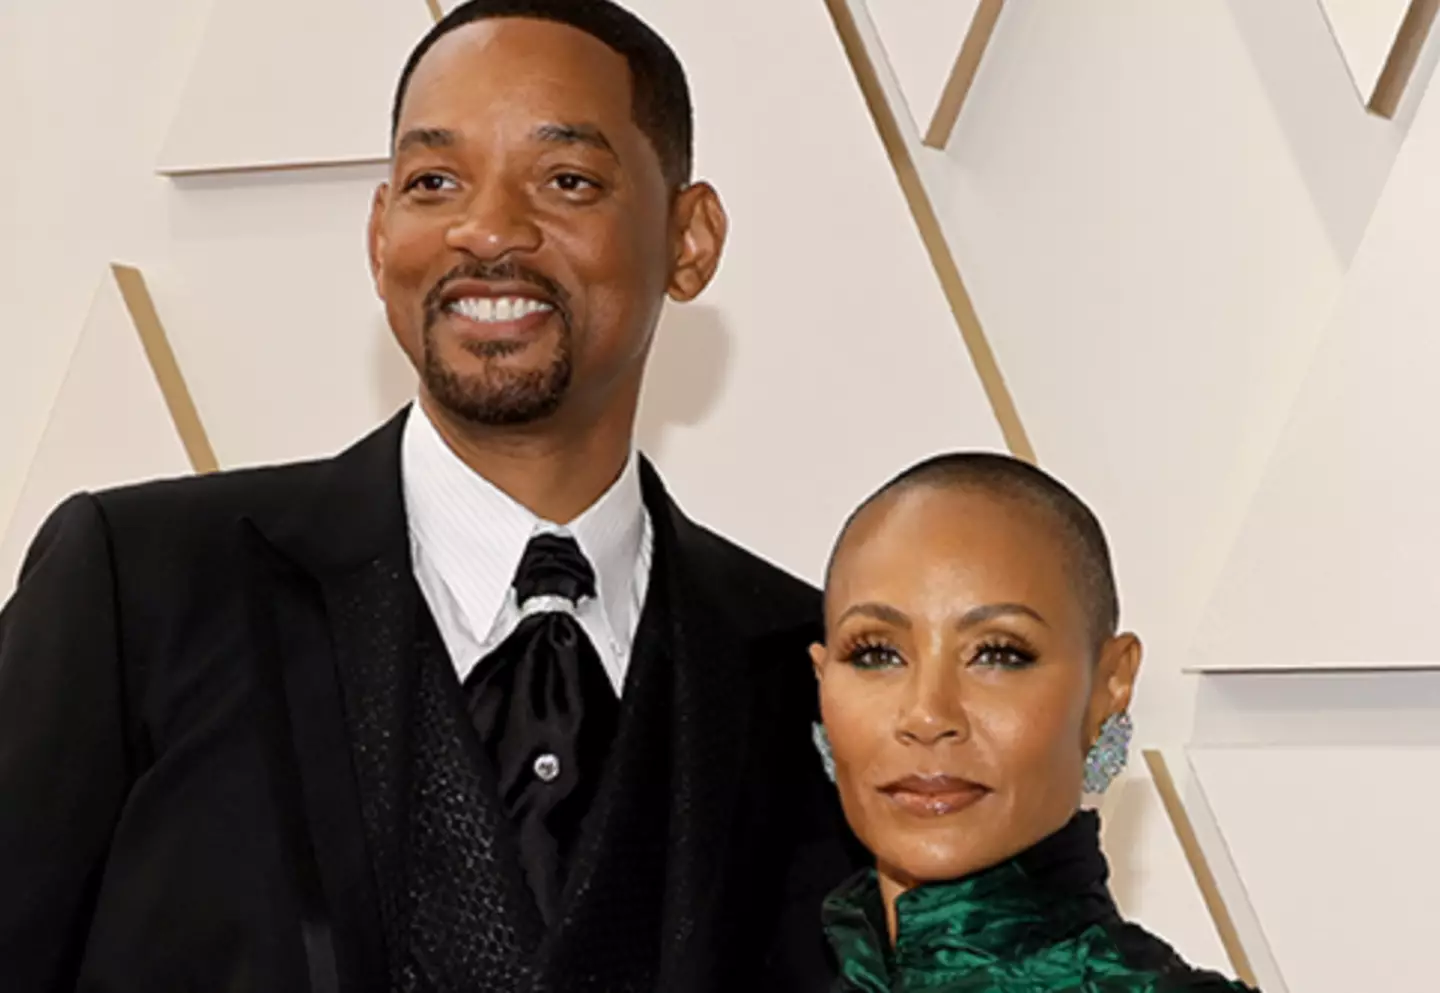 Will made clear he still has a connection with Jada. (Mike Coppola/Getty Images)